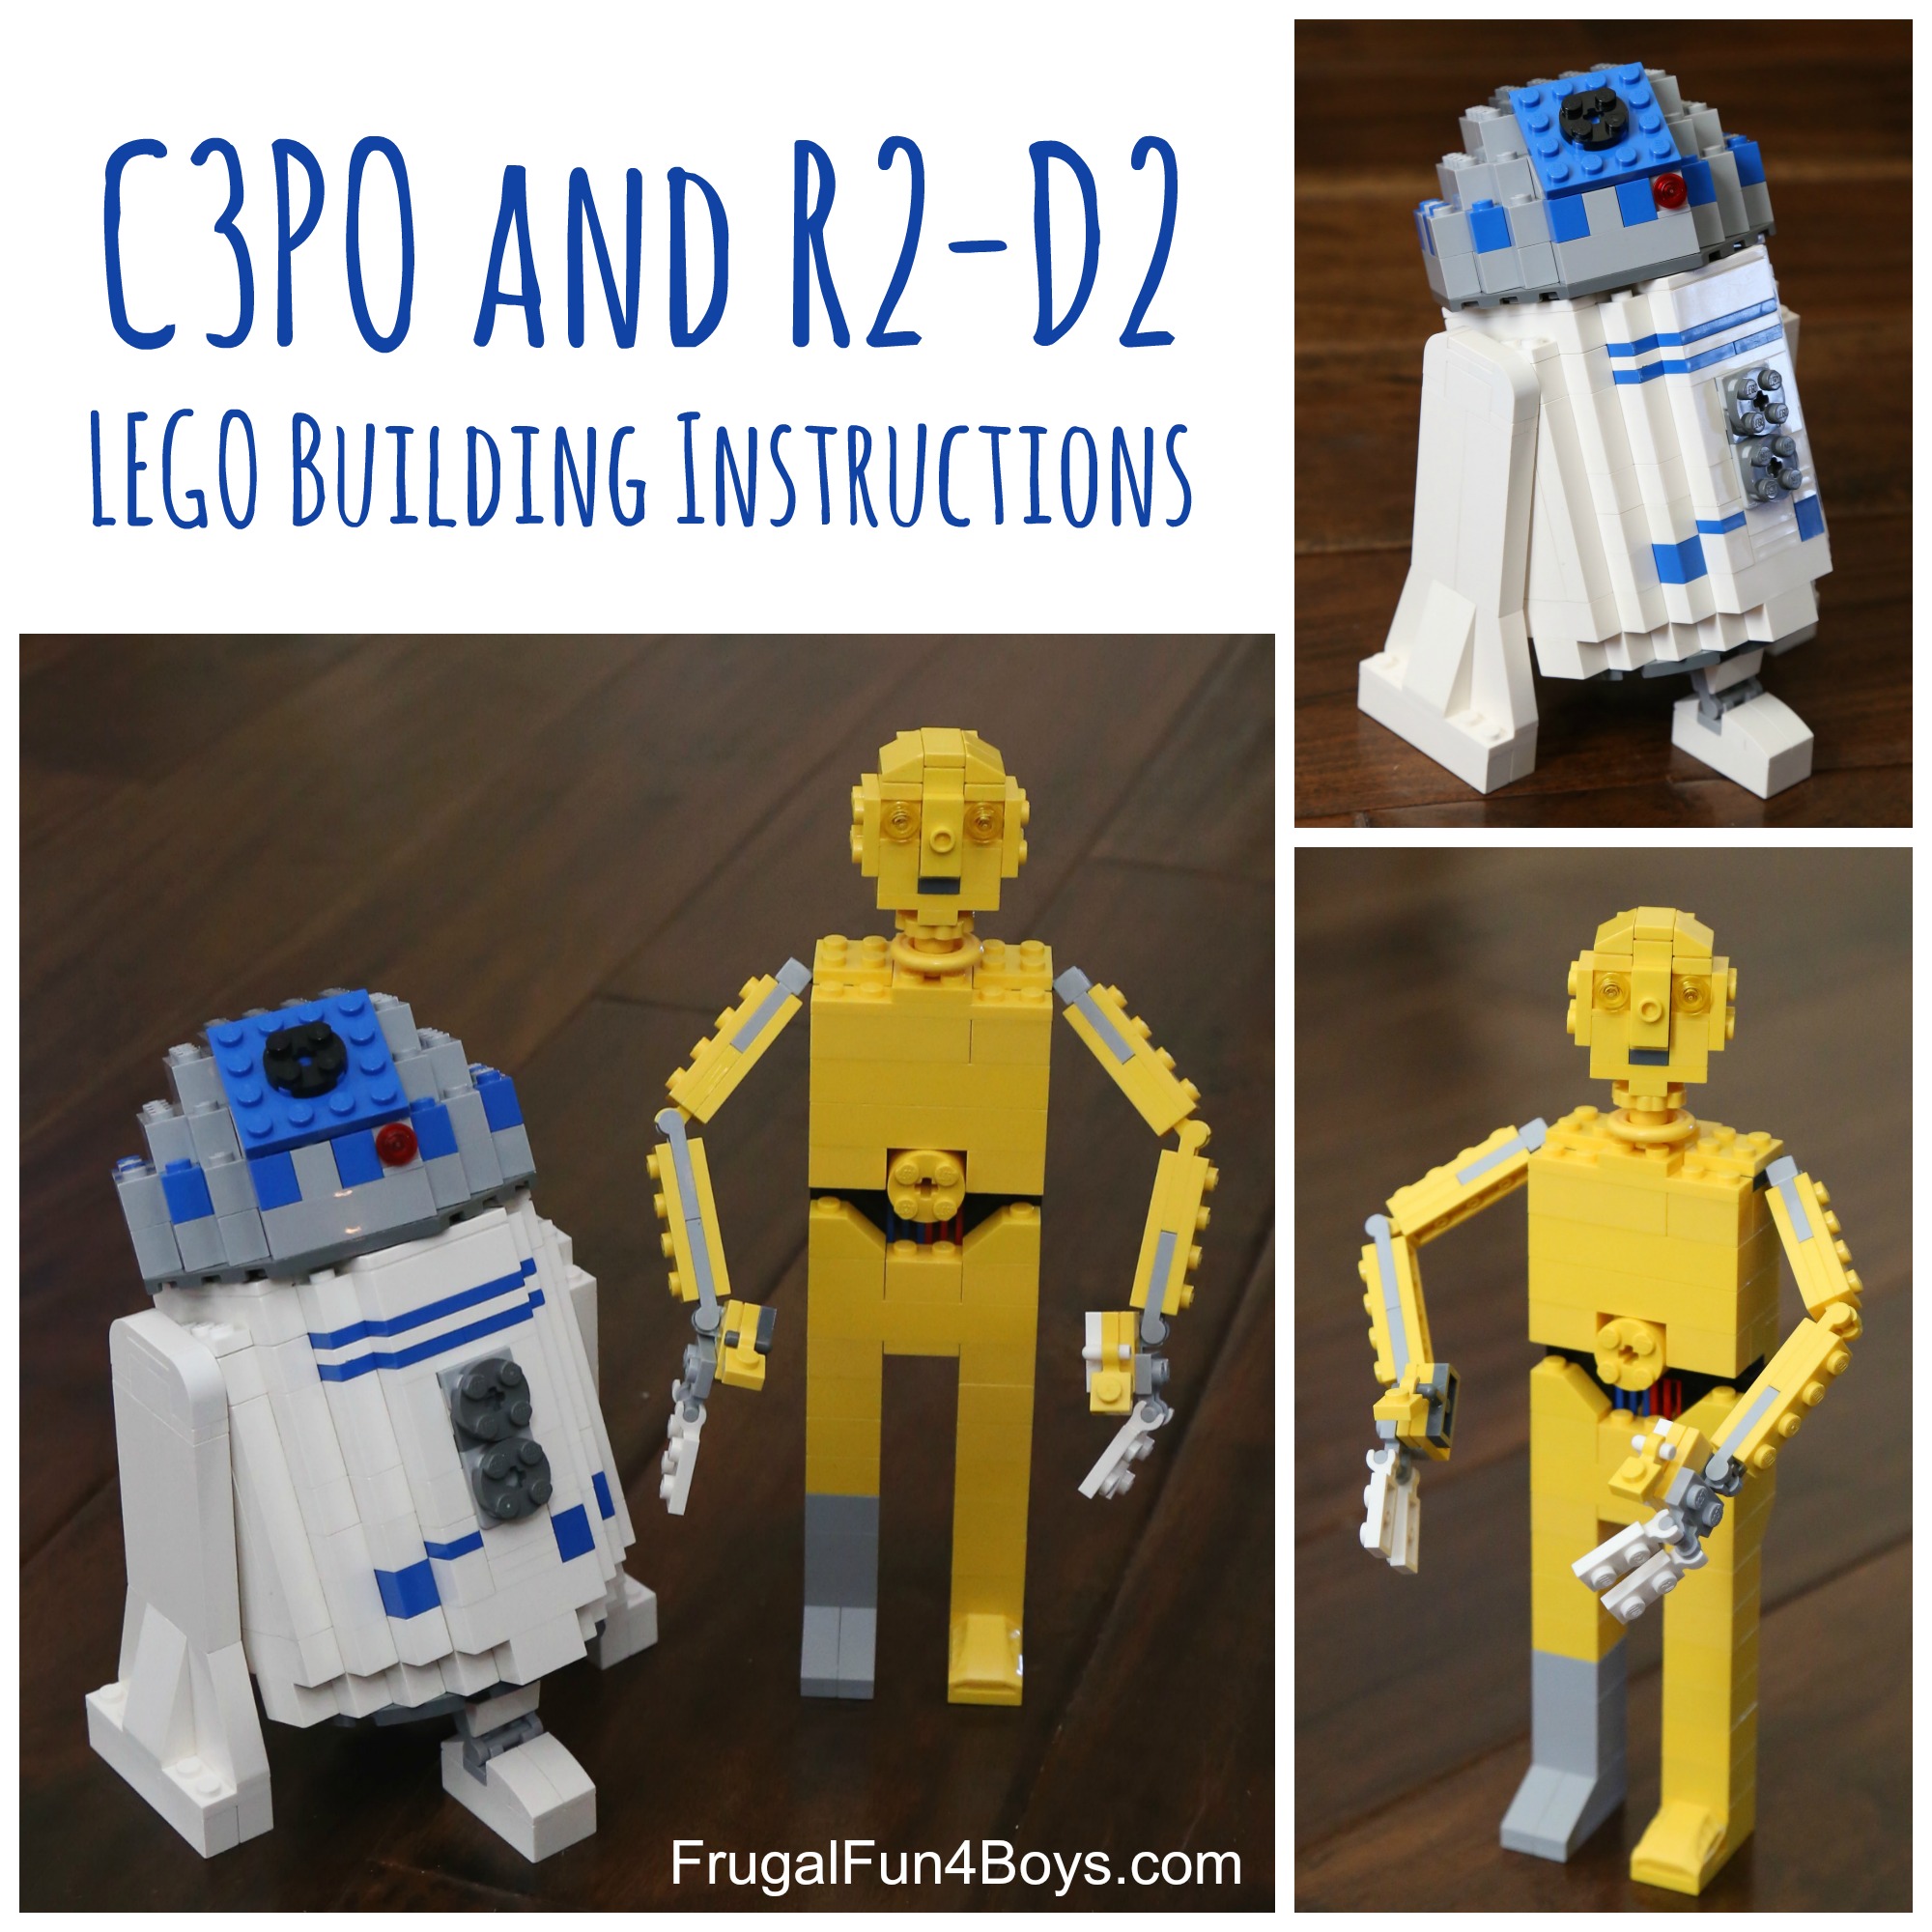 LEGO C3PO and R2-D2 Building Instructions